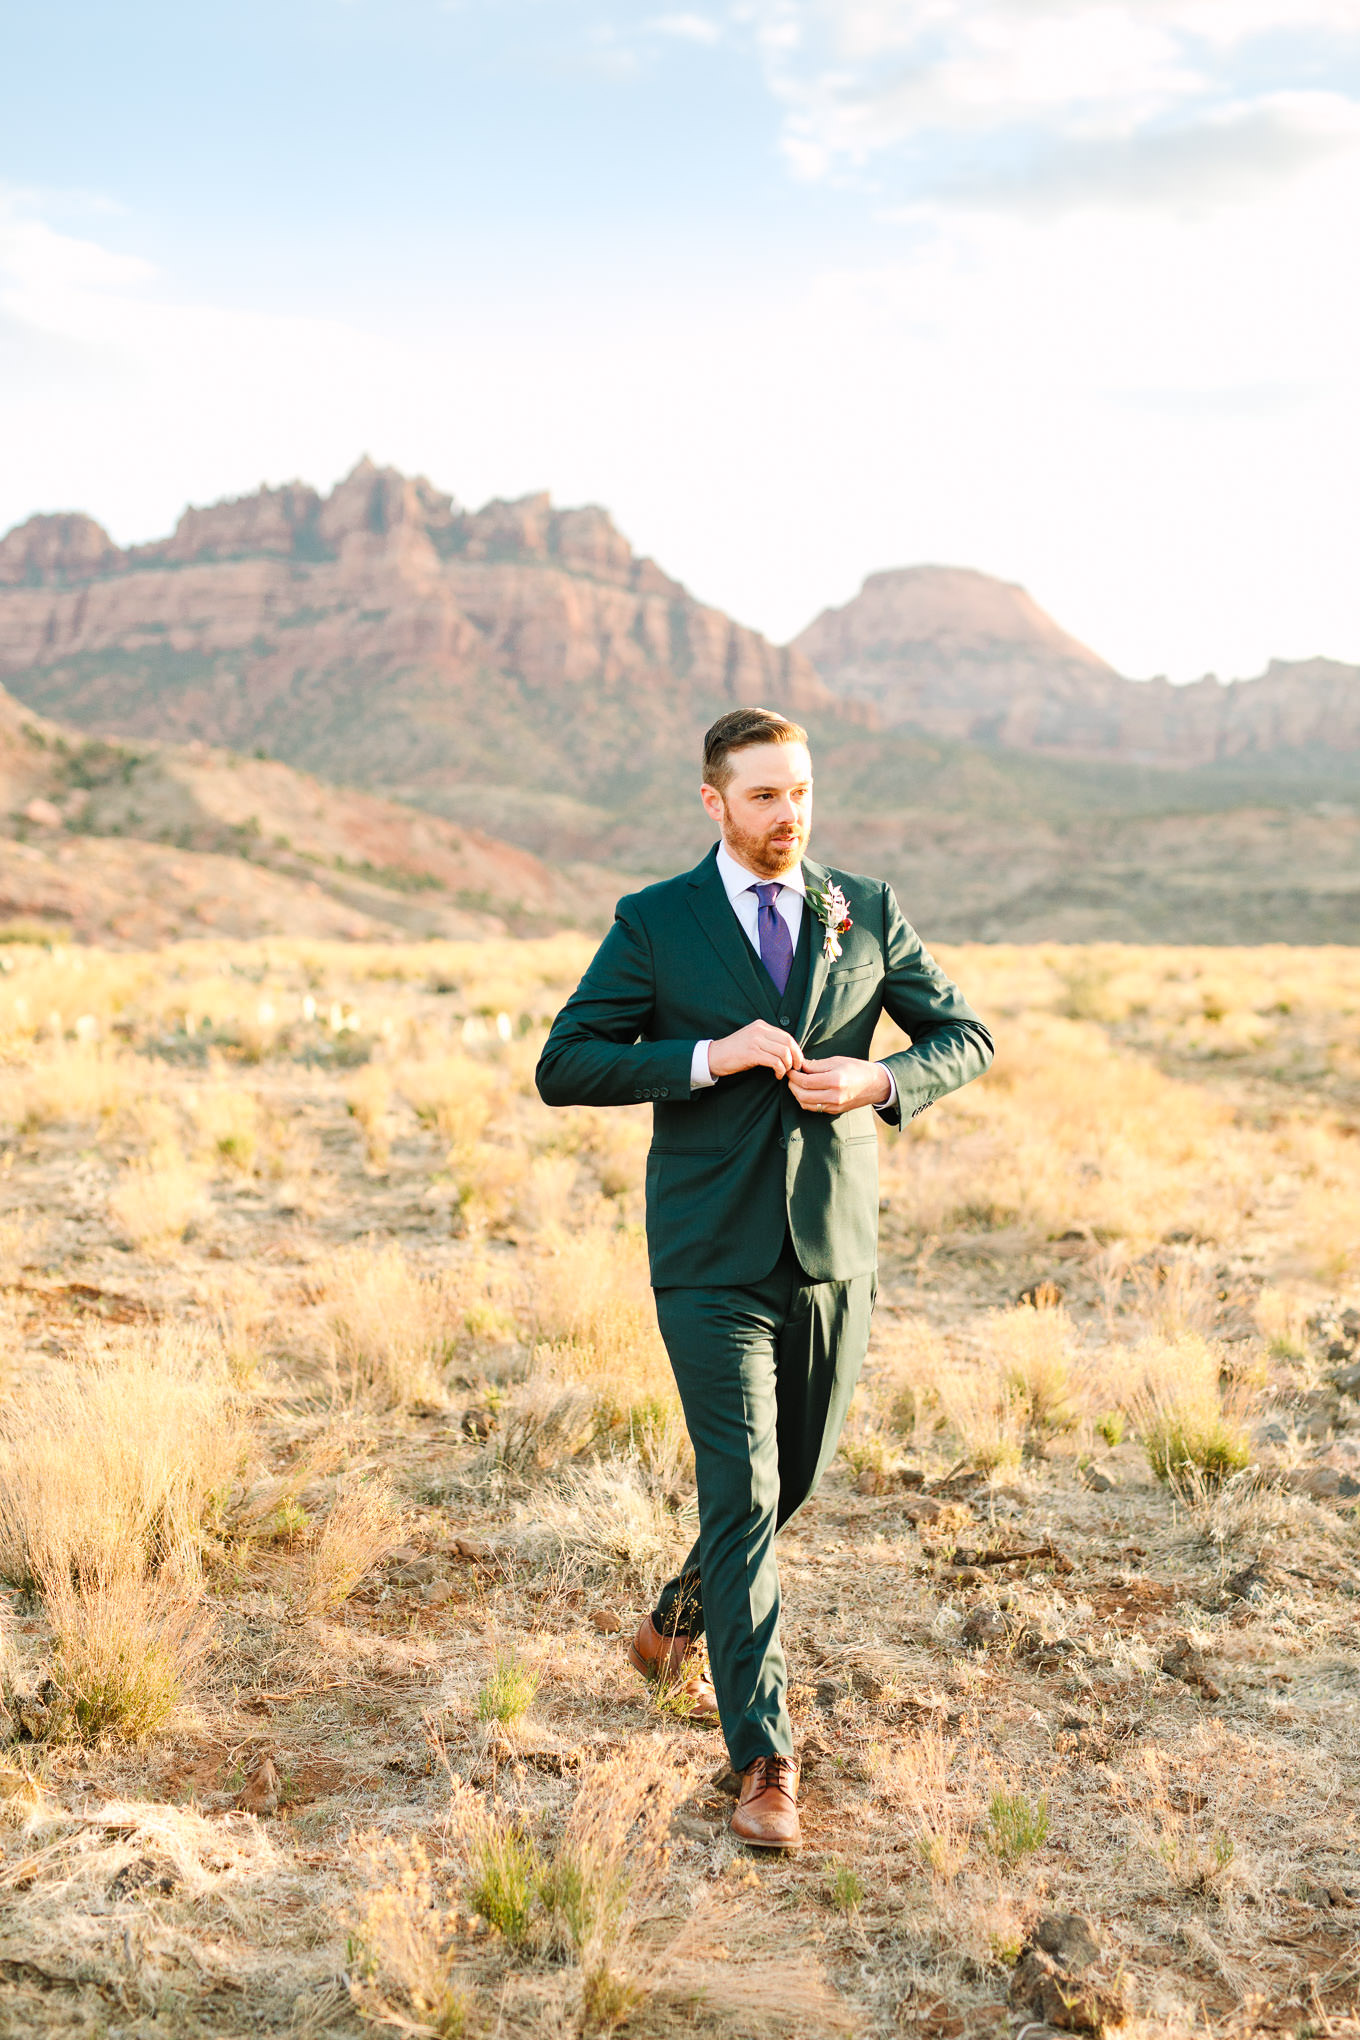 Groom portrait in green suit | Zion Under Canvas camping elopement at sunrise | Colorful elopement photography | #utahelopement #zionelopement #zionwedding #undercanvaszion #sunriseelopement #adventureelopement  Source: Mary Costa Photography | Los Angeles